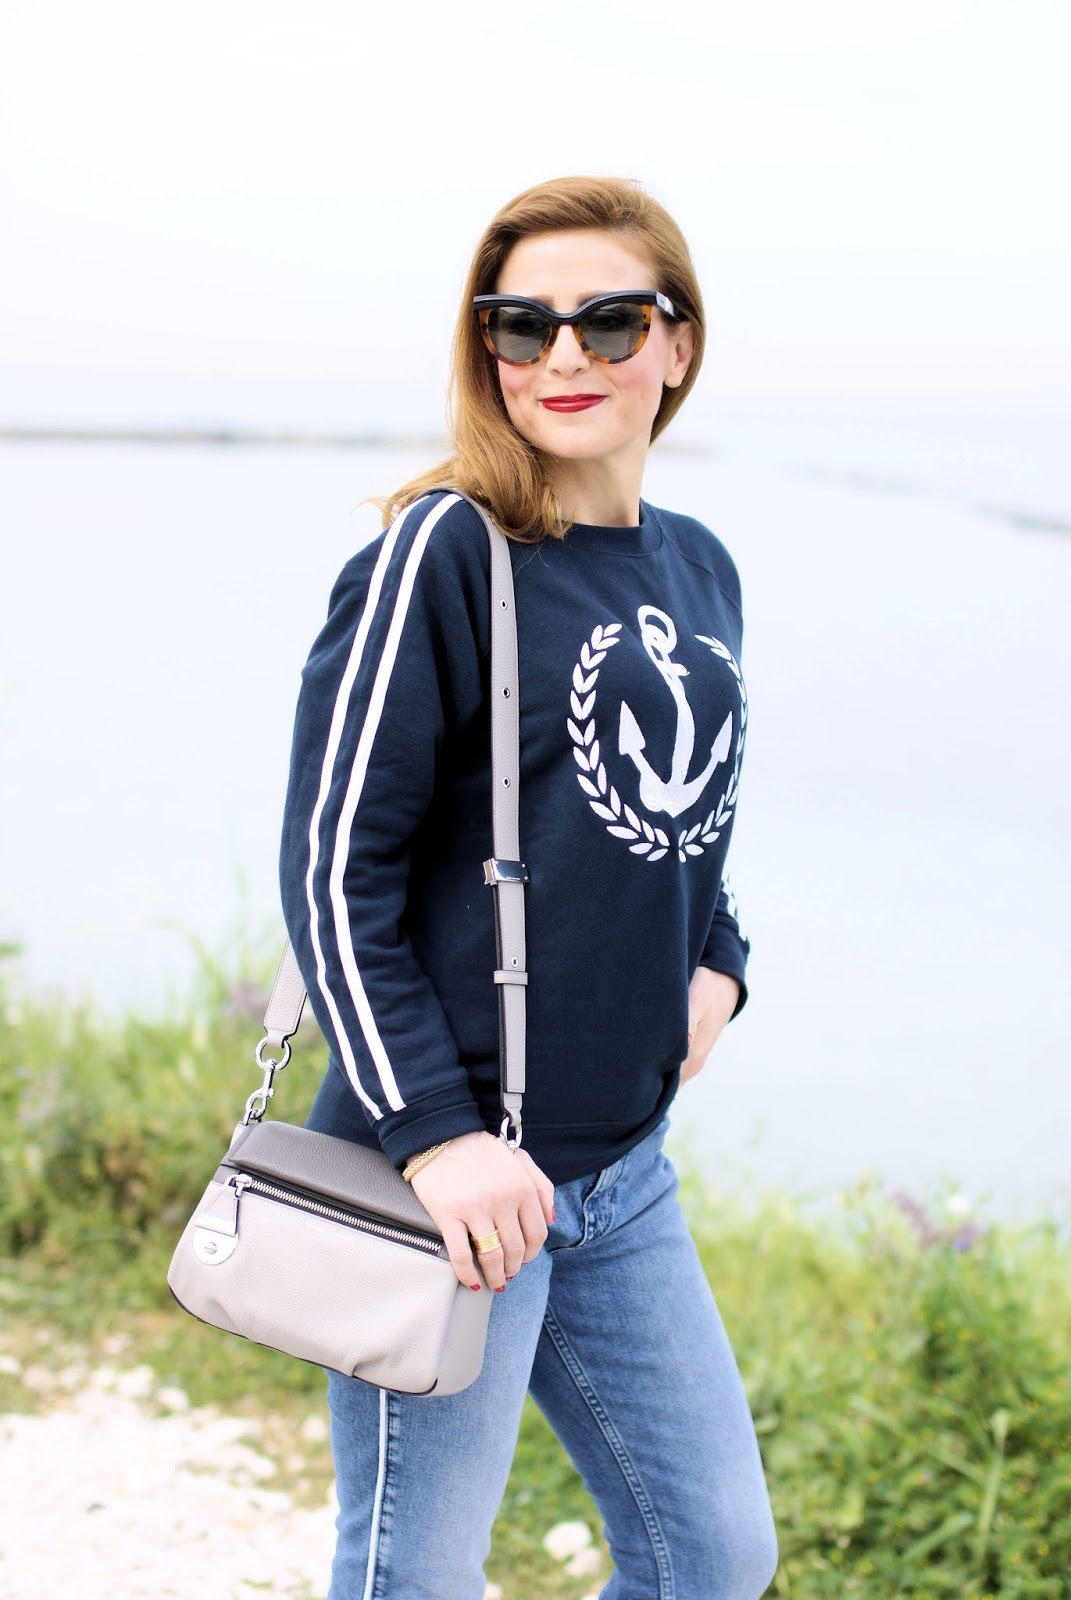 navy inspired sweatshirt and polka dot adidas Gazelle sneakers on Fashion and Cookies fashion blog, fashion blogger style